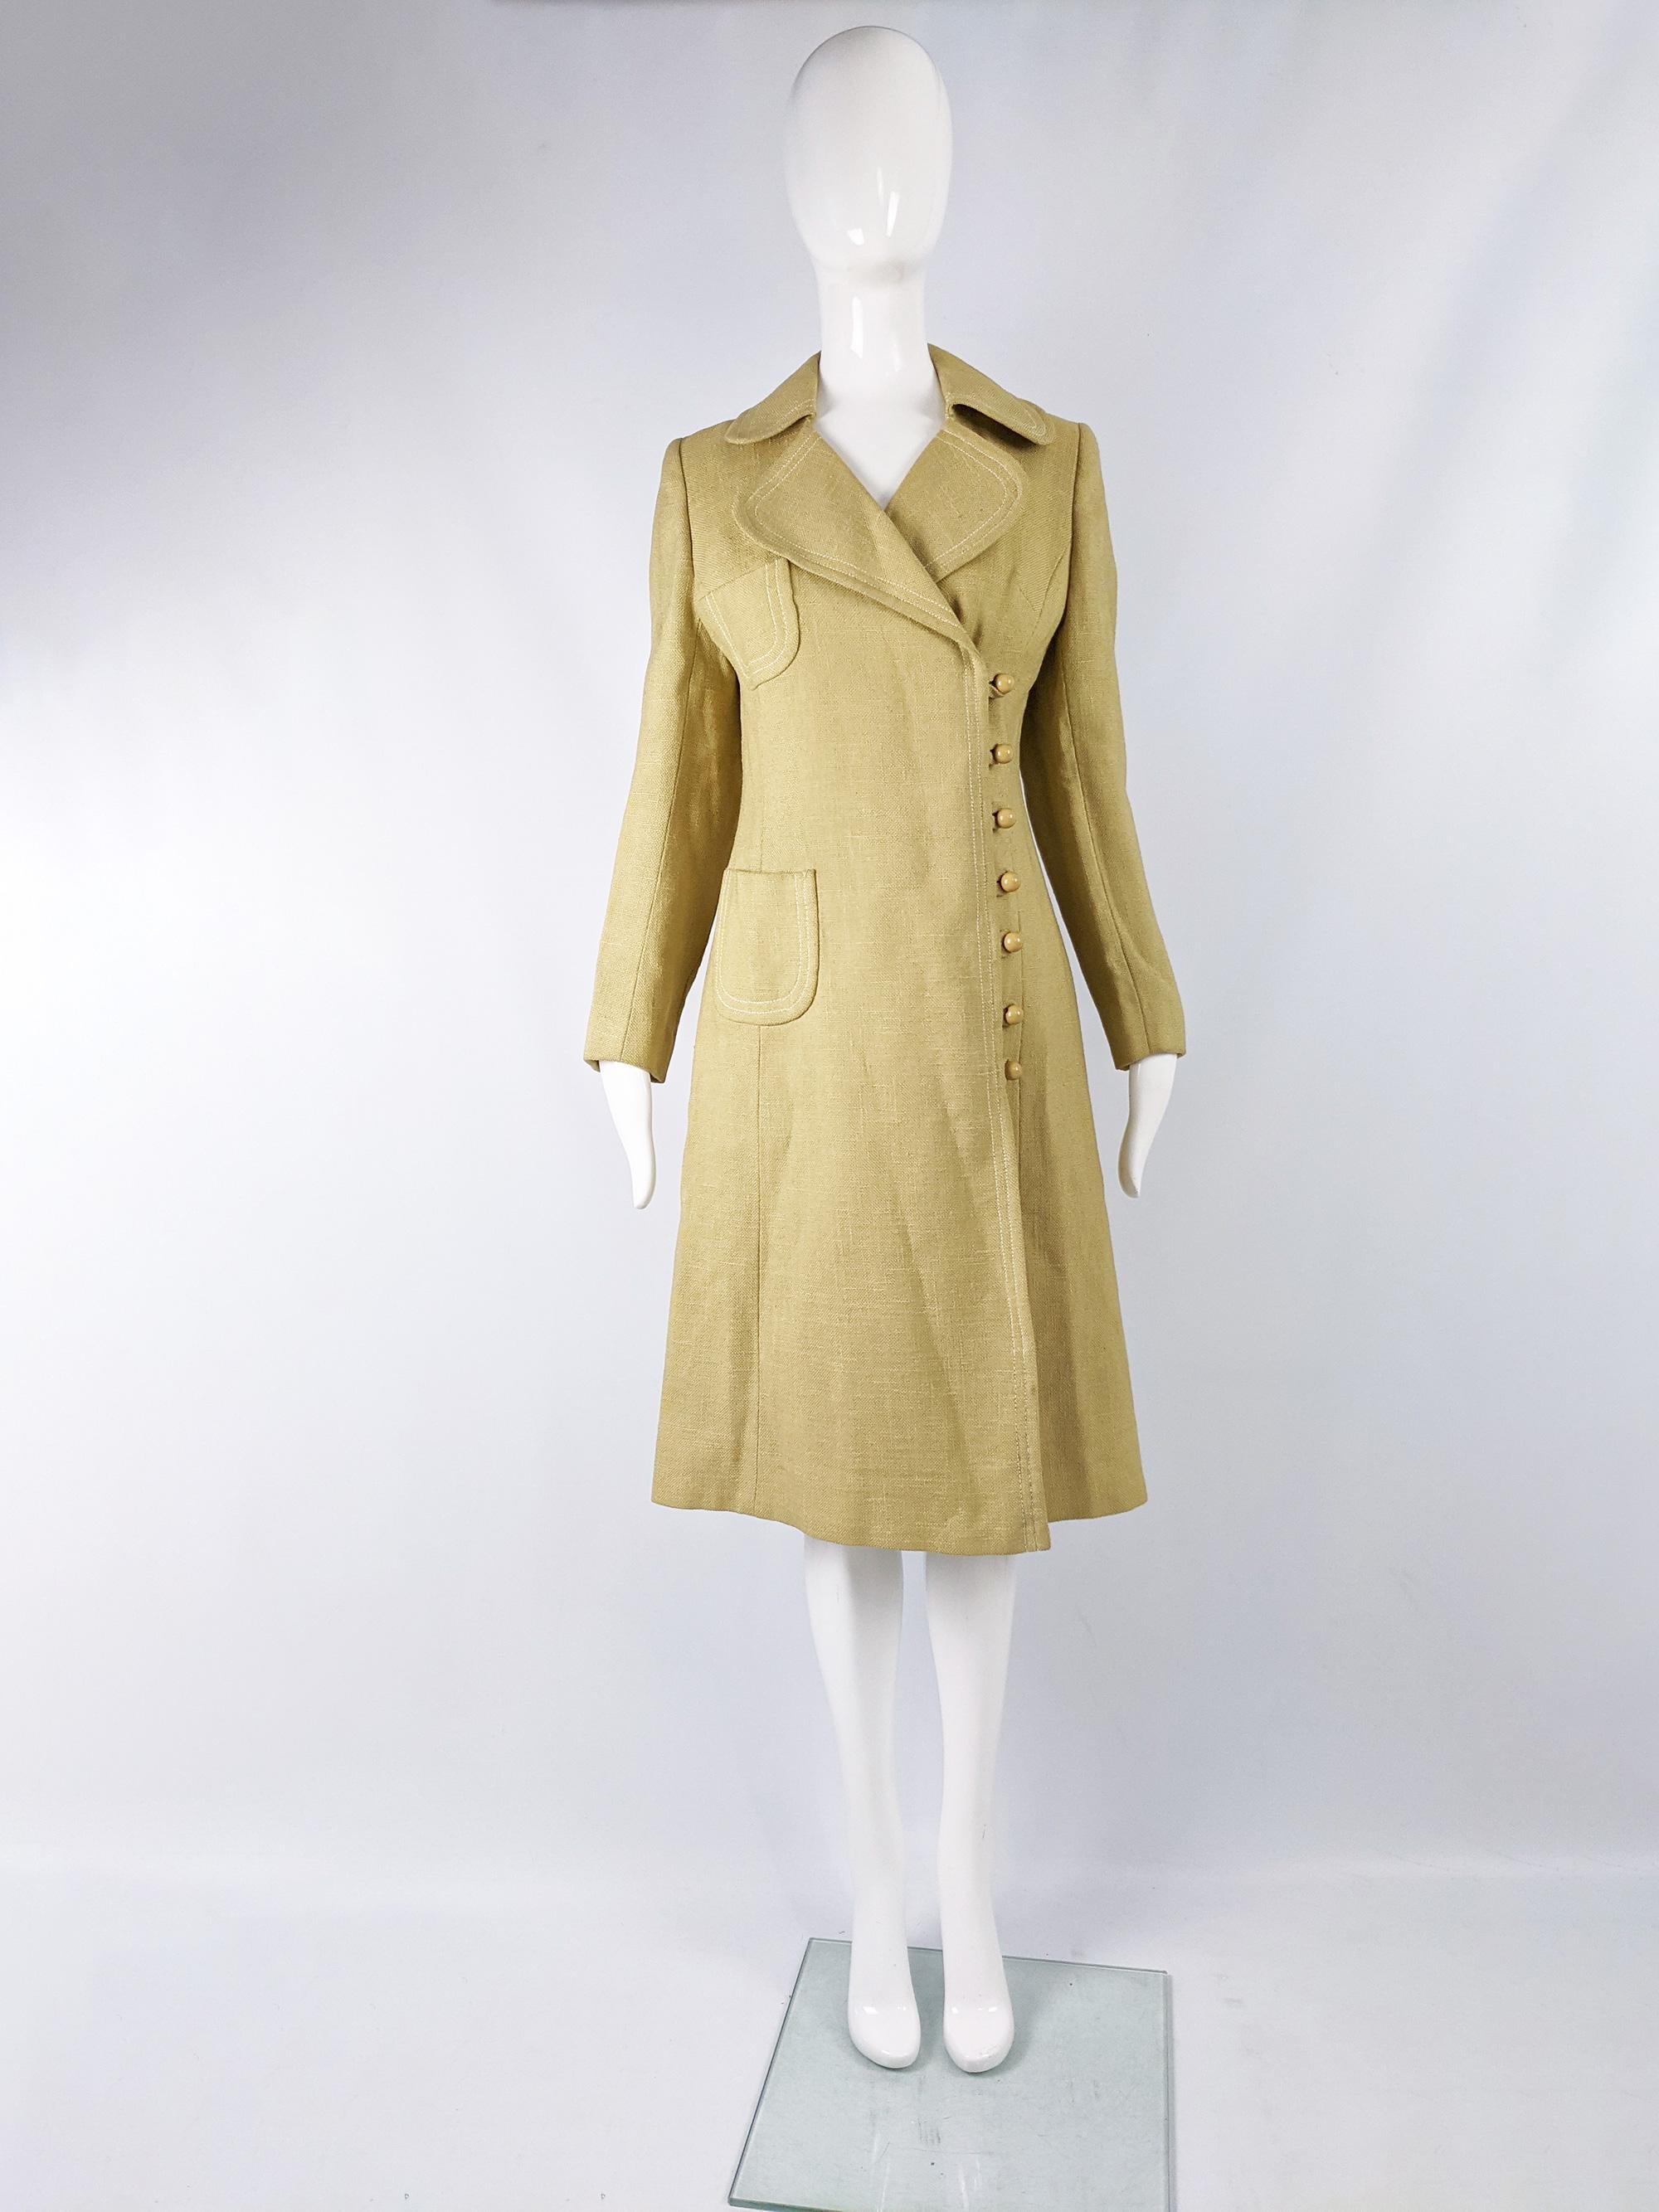 A fabulous vintage womens mod coat from the 60s by quality British designer, Mark Russell. In a thick yellow linen with off centre buttons and white top stitching.

Size: fits roughly like a modern womens UK 10/ US 6/ EU 38. Please check